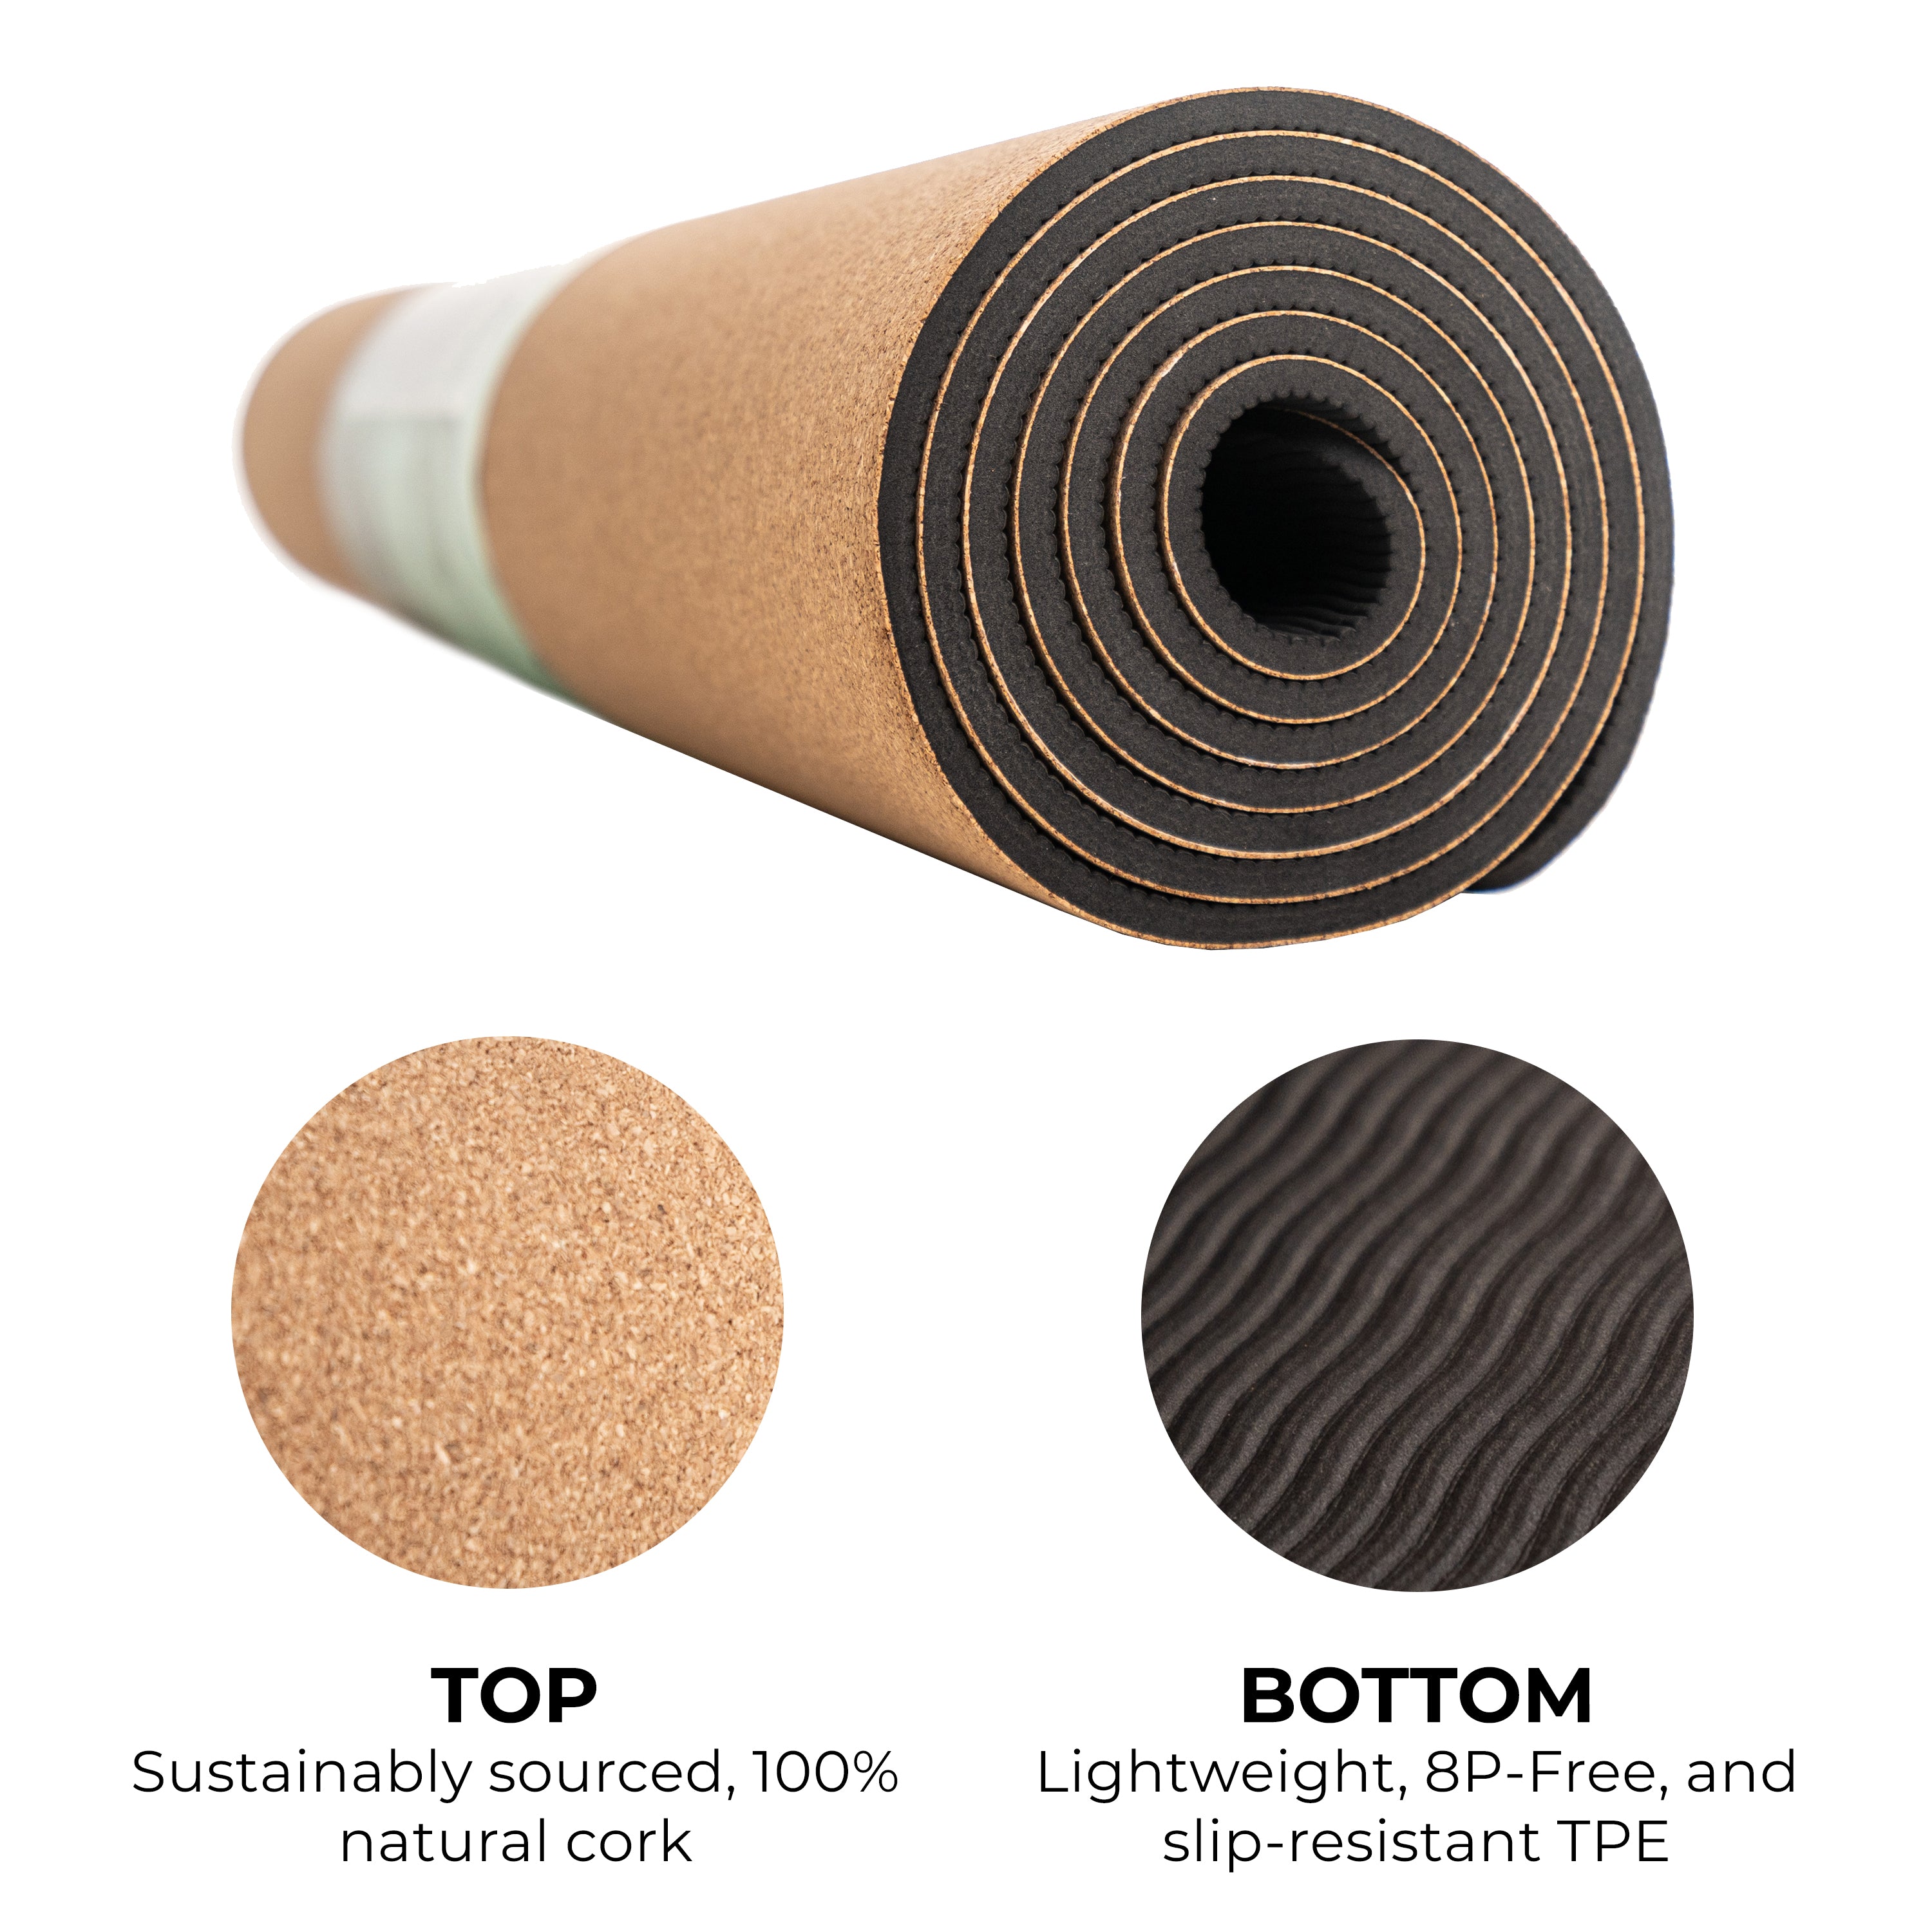 Widewing Mat: The Ultimate 36-inch Wide Yoga Mat - Moccasin